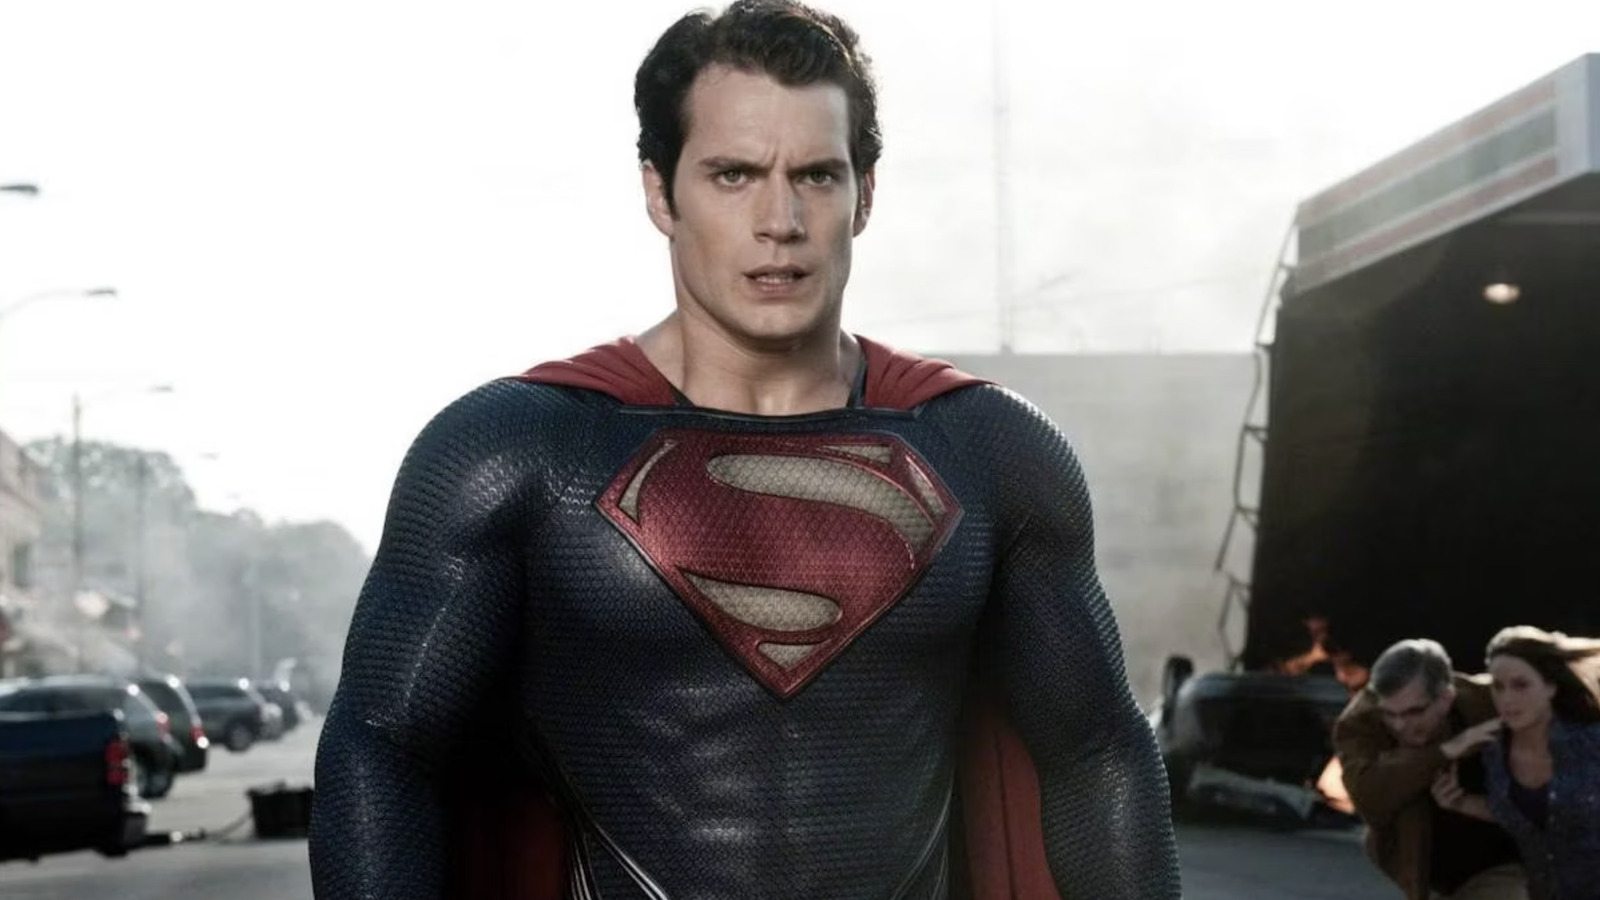 Man of Steel' Review: Zack Snyder's Strenuously Revisionist Superhero Saga